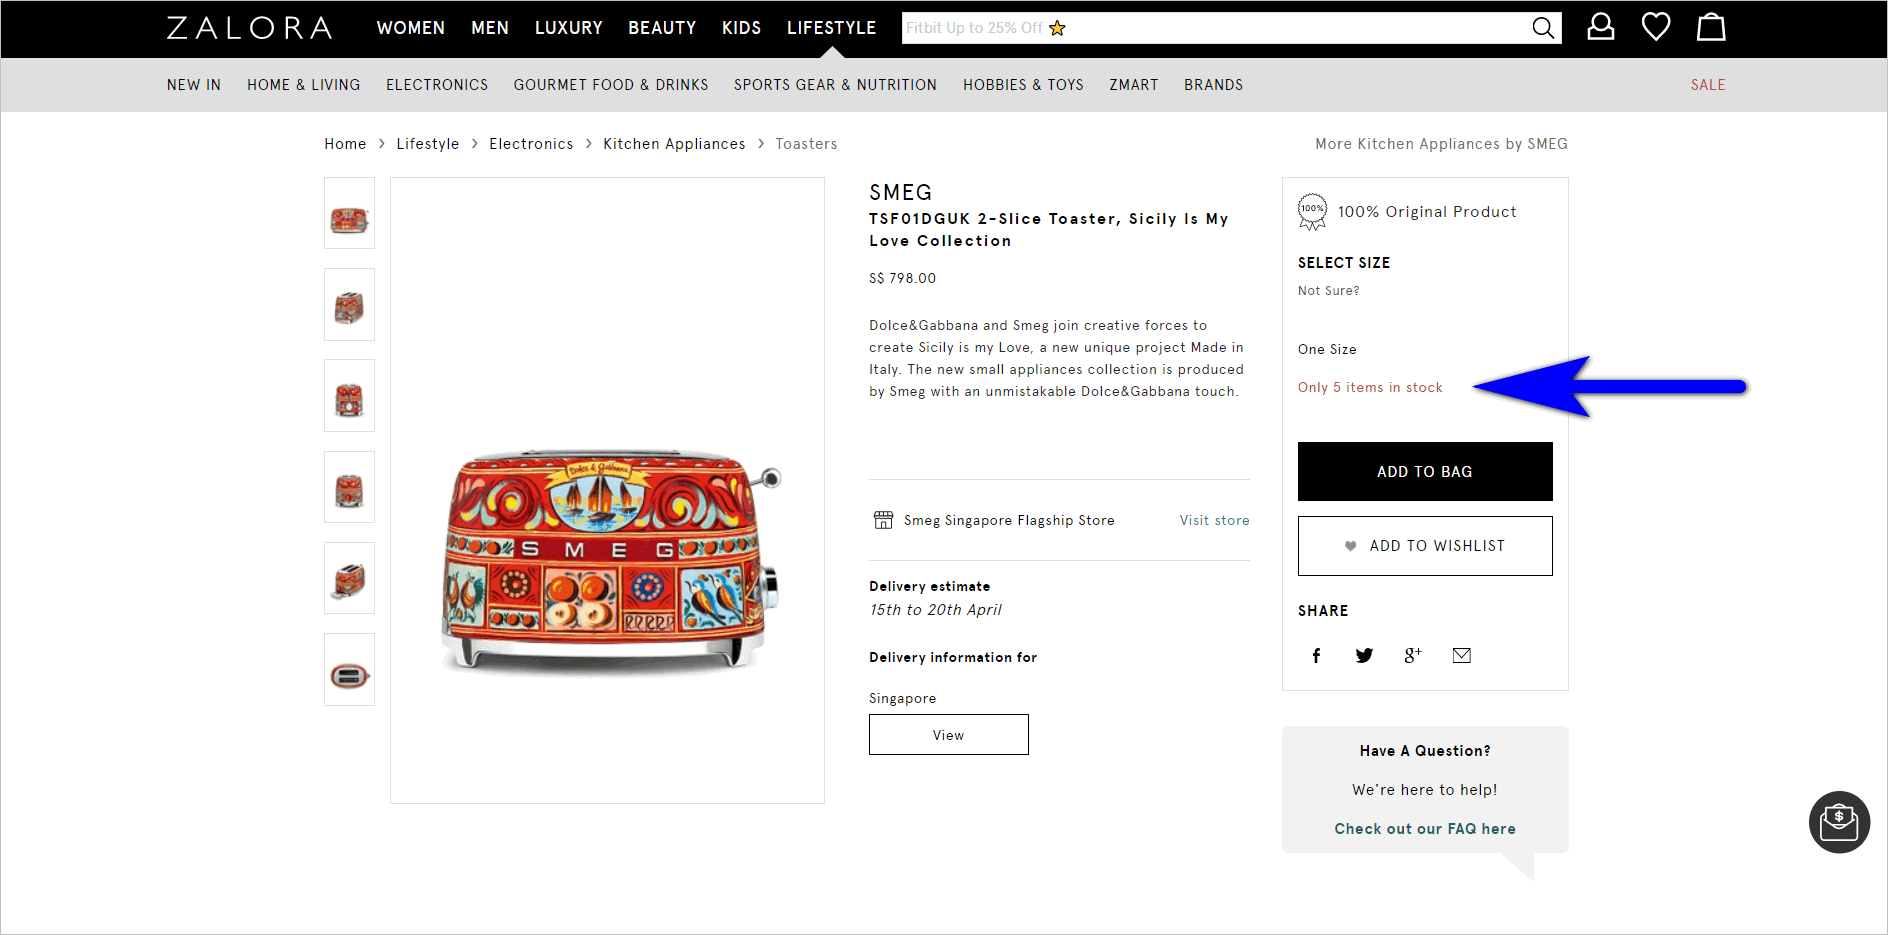 scarcity marketing - showing limited availability example - zalora.com.sg's product detail page for a smeg dolce & gabbana toaster indicates that there are 